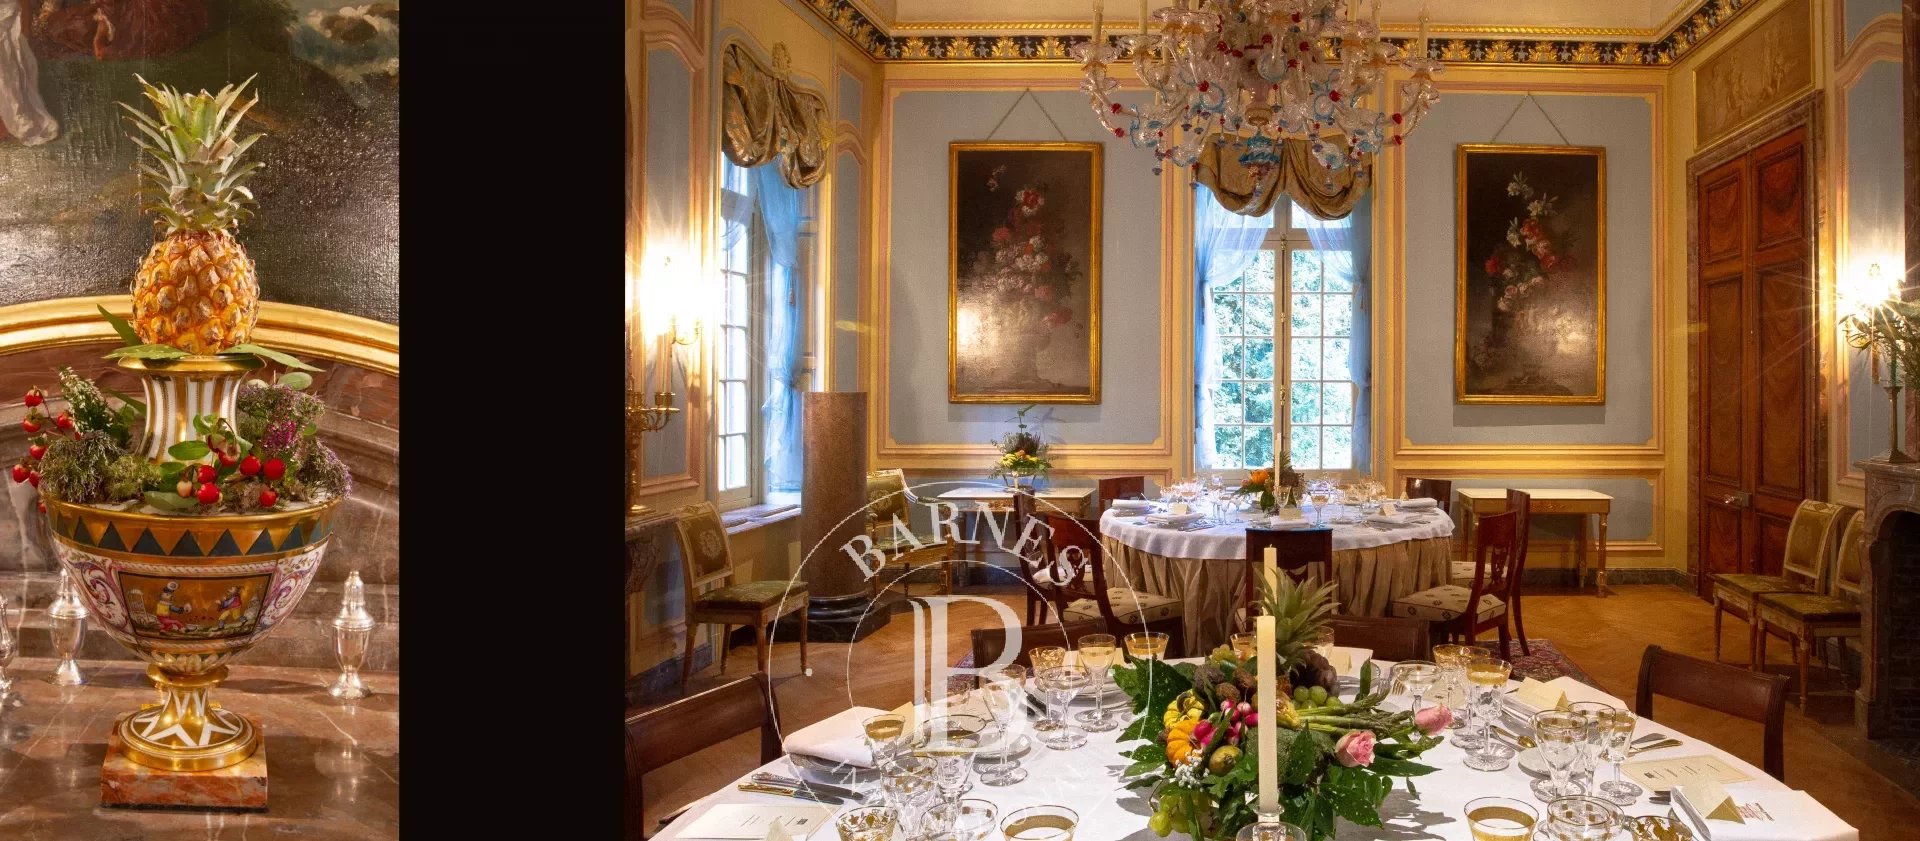 Magnificent Château set in over 4 hectares of parkland